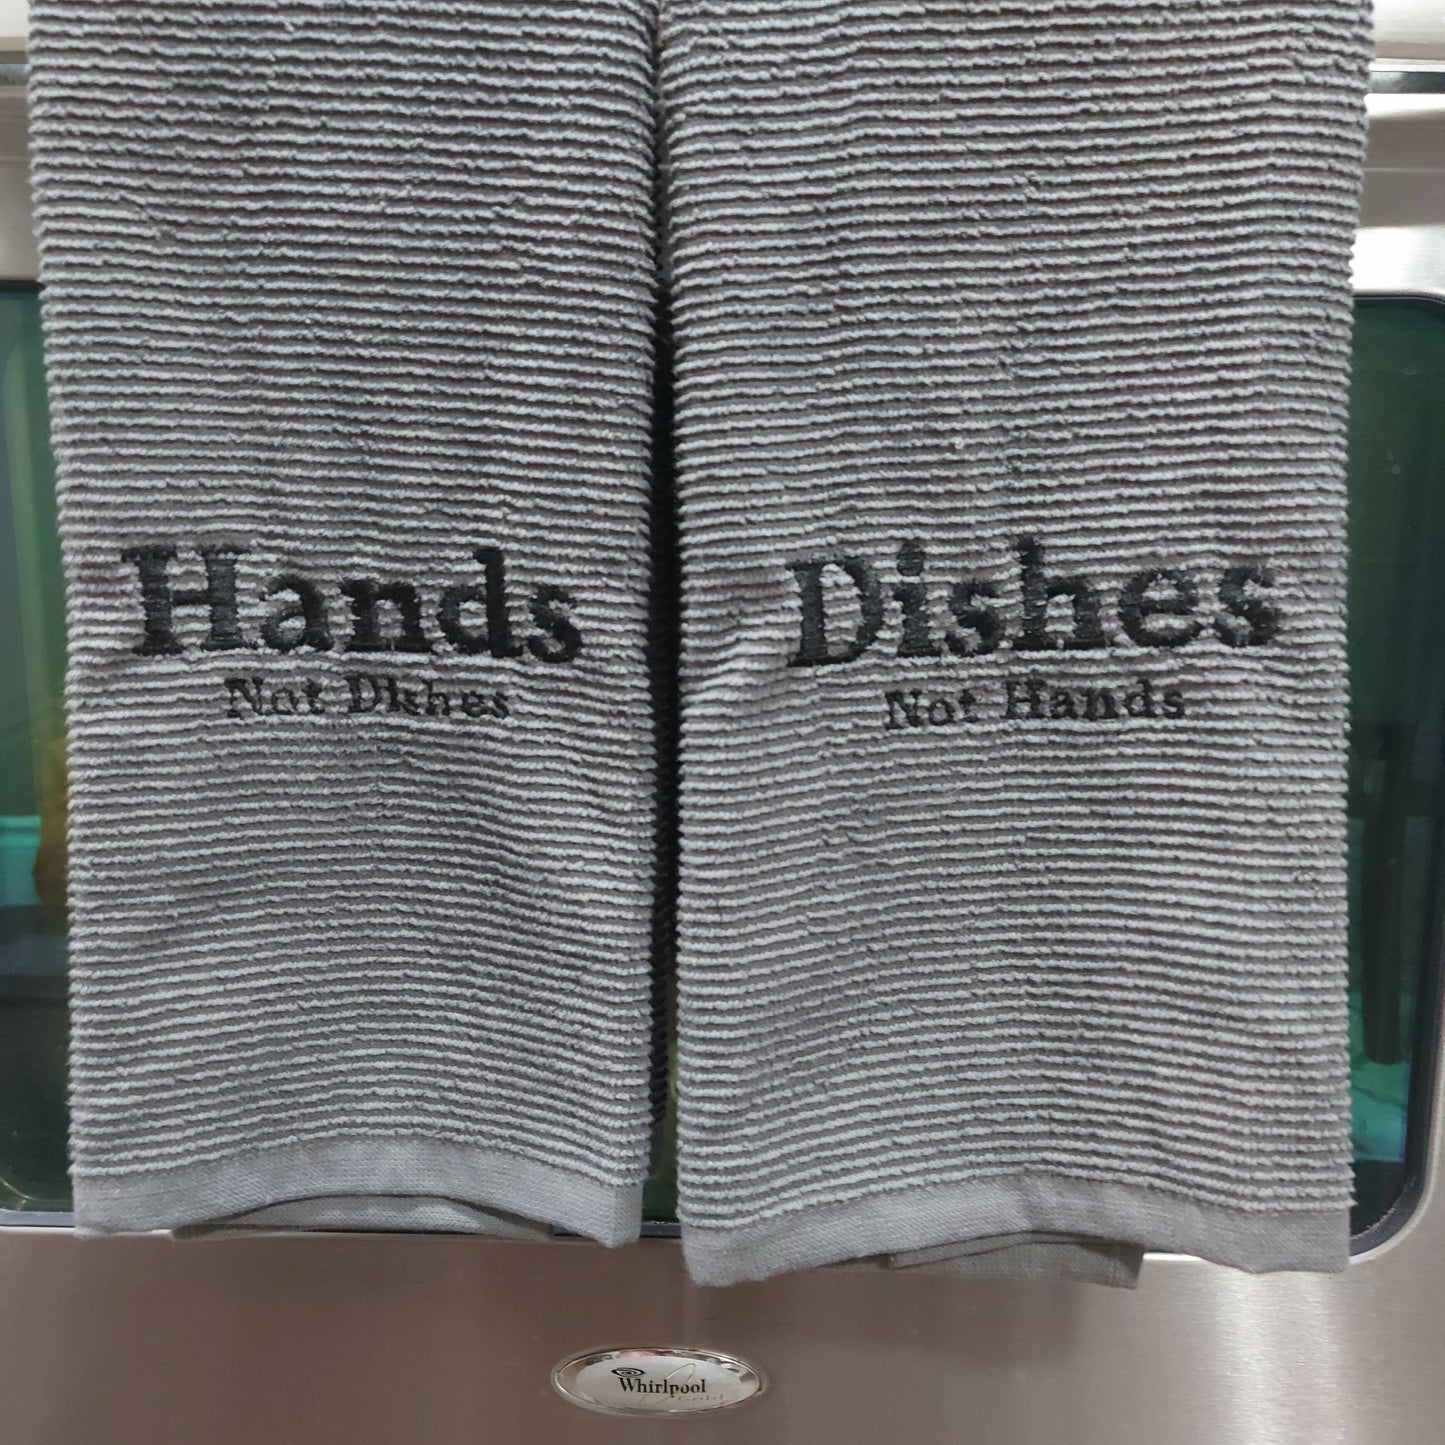 Towel - HANDS not dishes, DISHES not hands